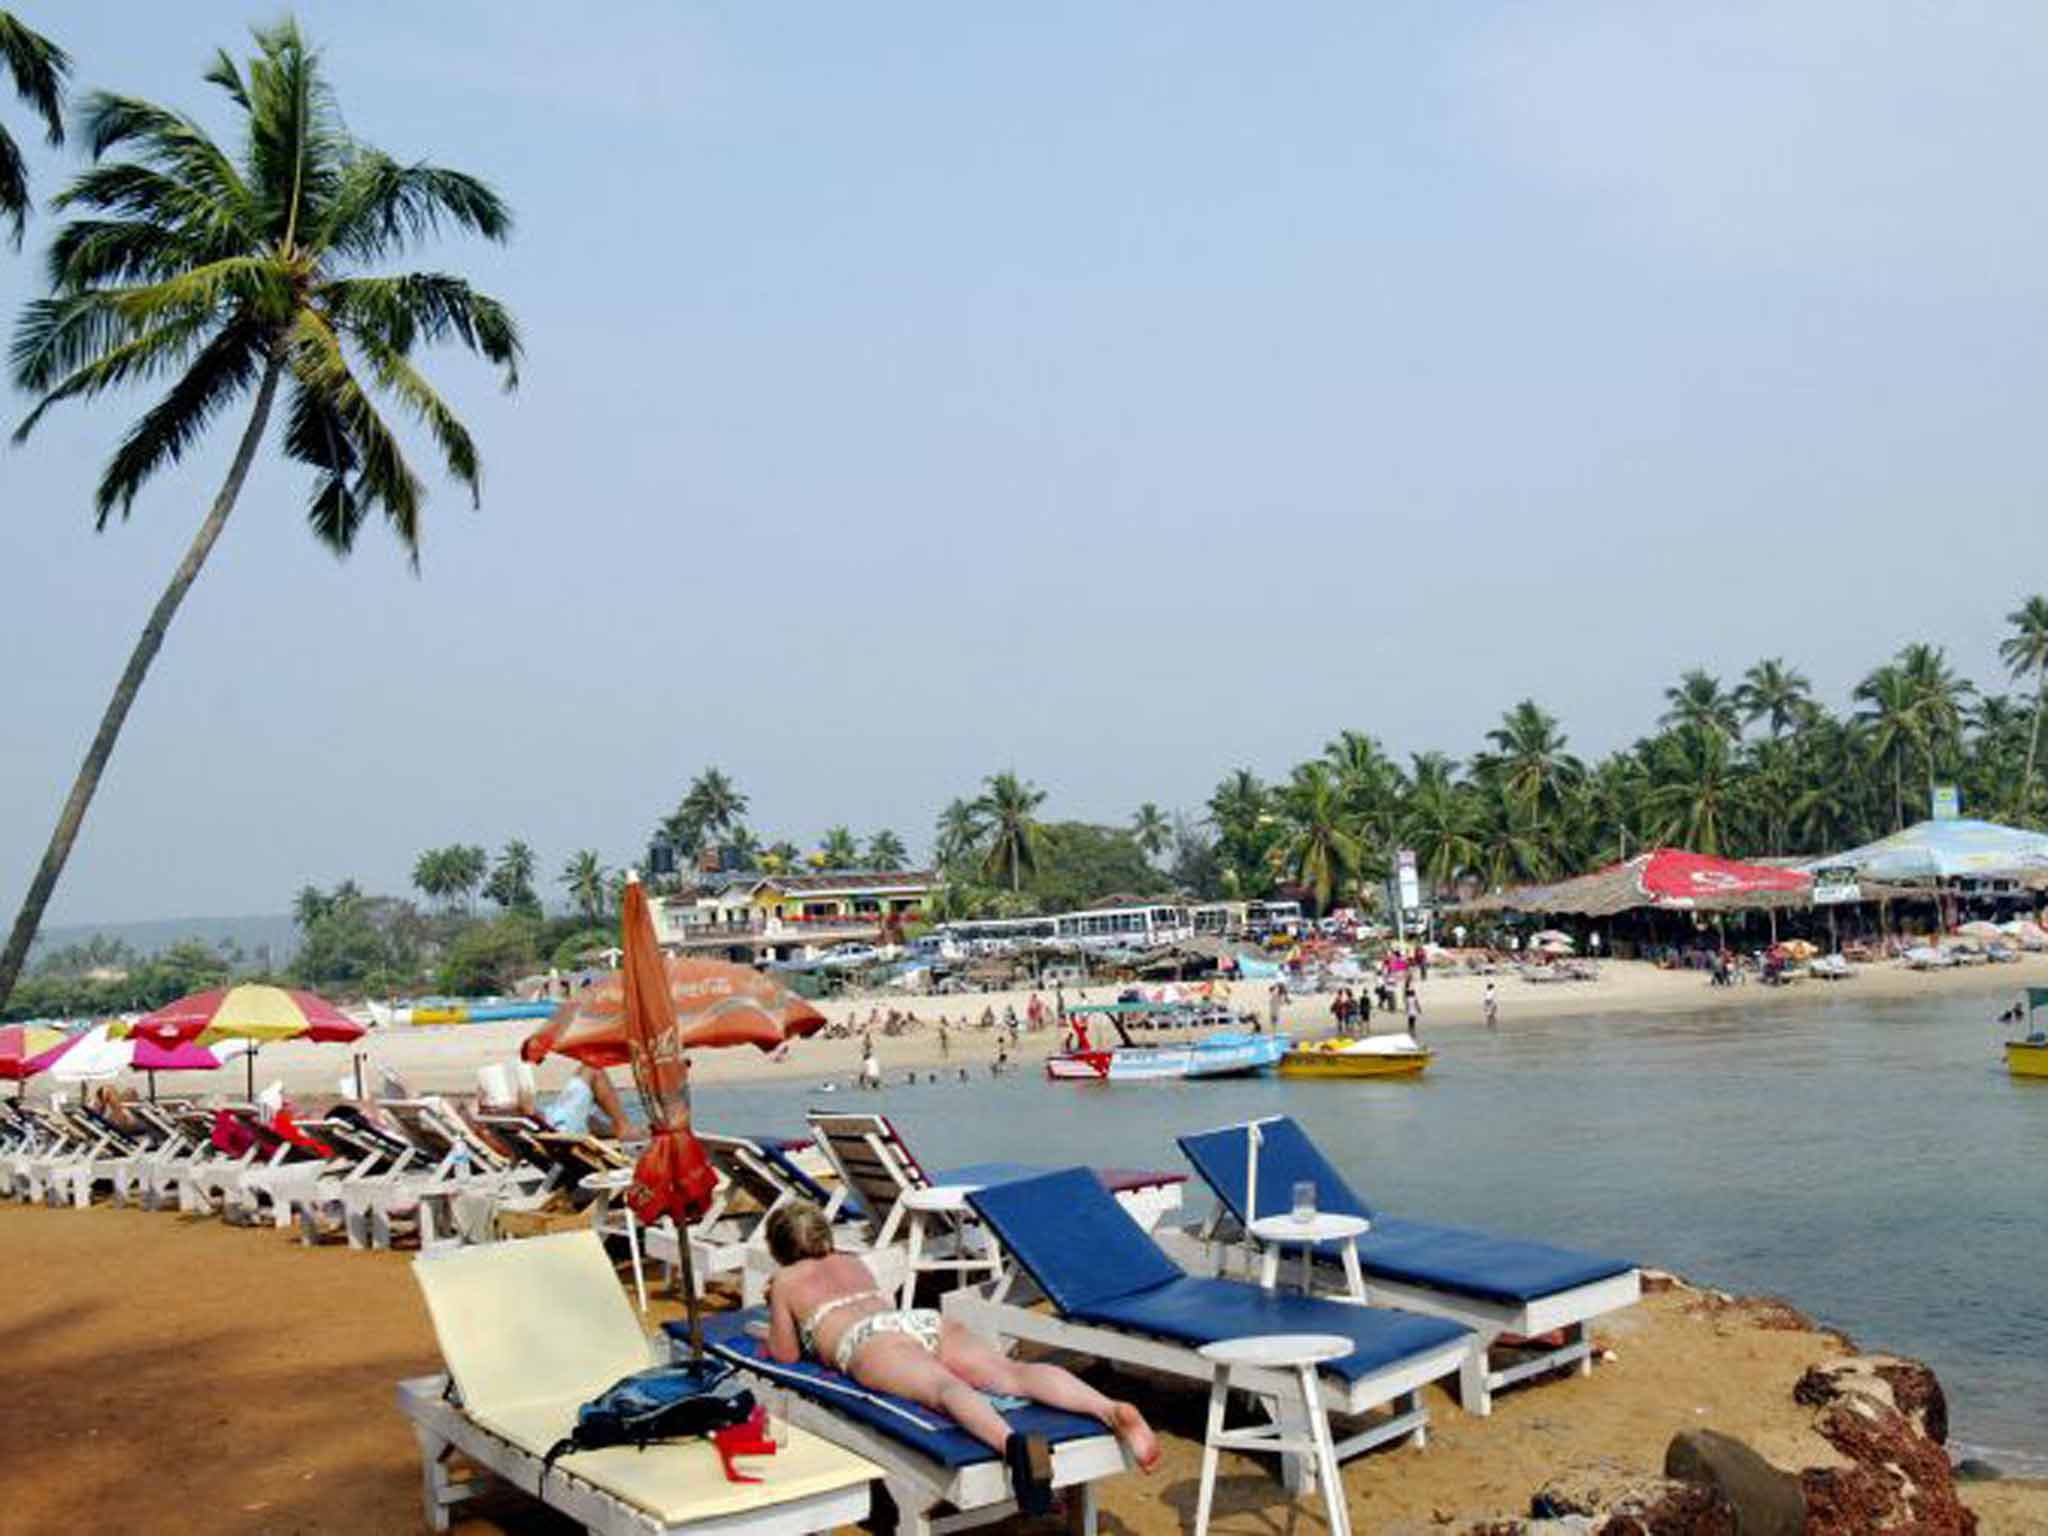 Goa is not typical of India when it comes to the code of modesty